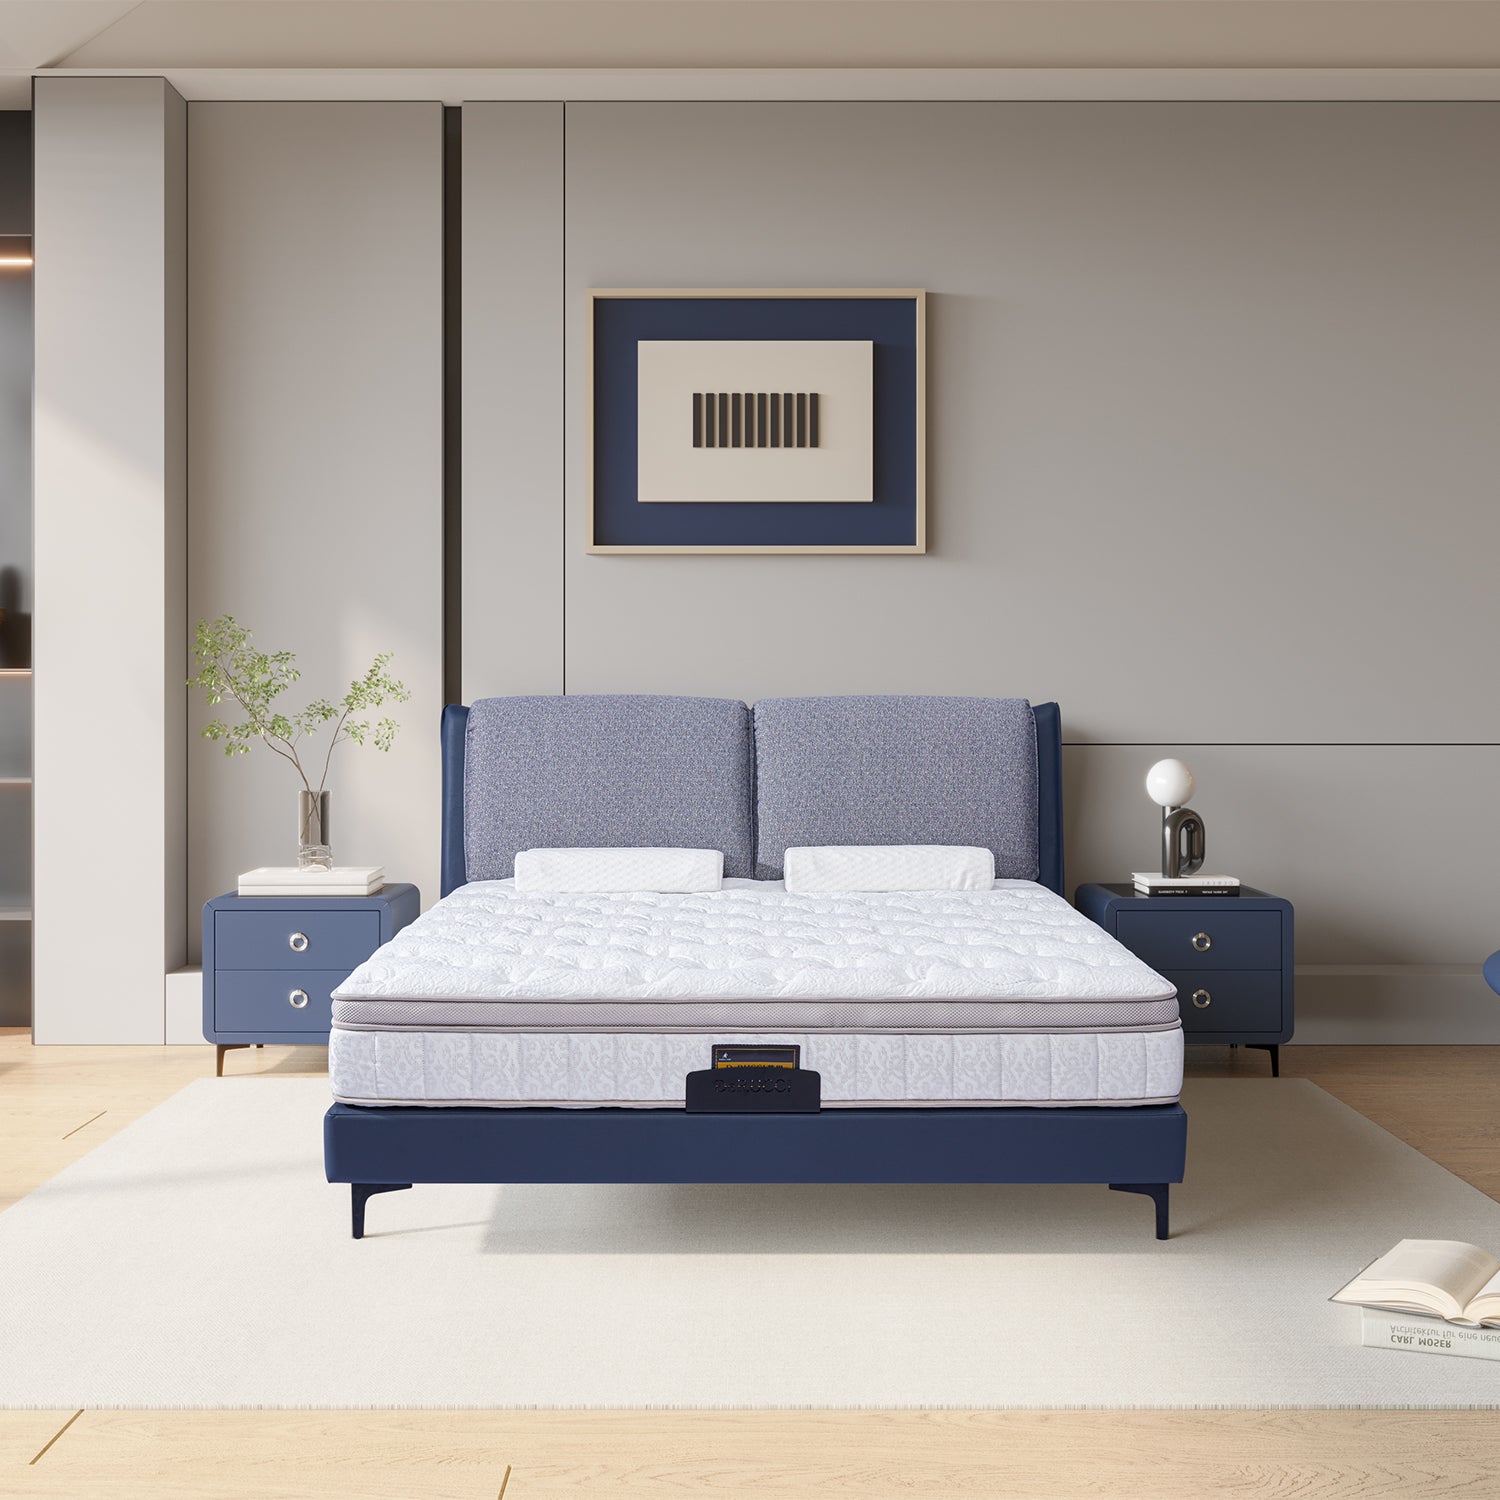 DeRUCCI Bed Frame BOC1 - 017 in a modern bedroom setup with blue fabric upholstery and a comfortable mattress, flanked by nightstands with lamps and decor.